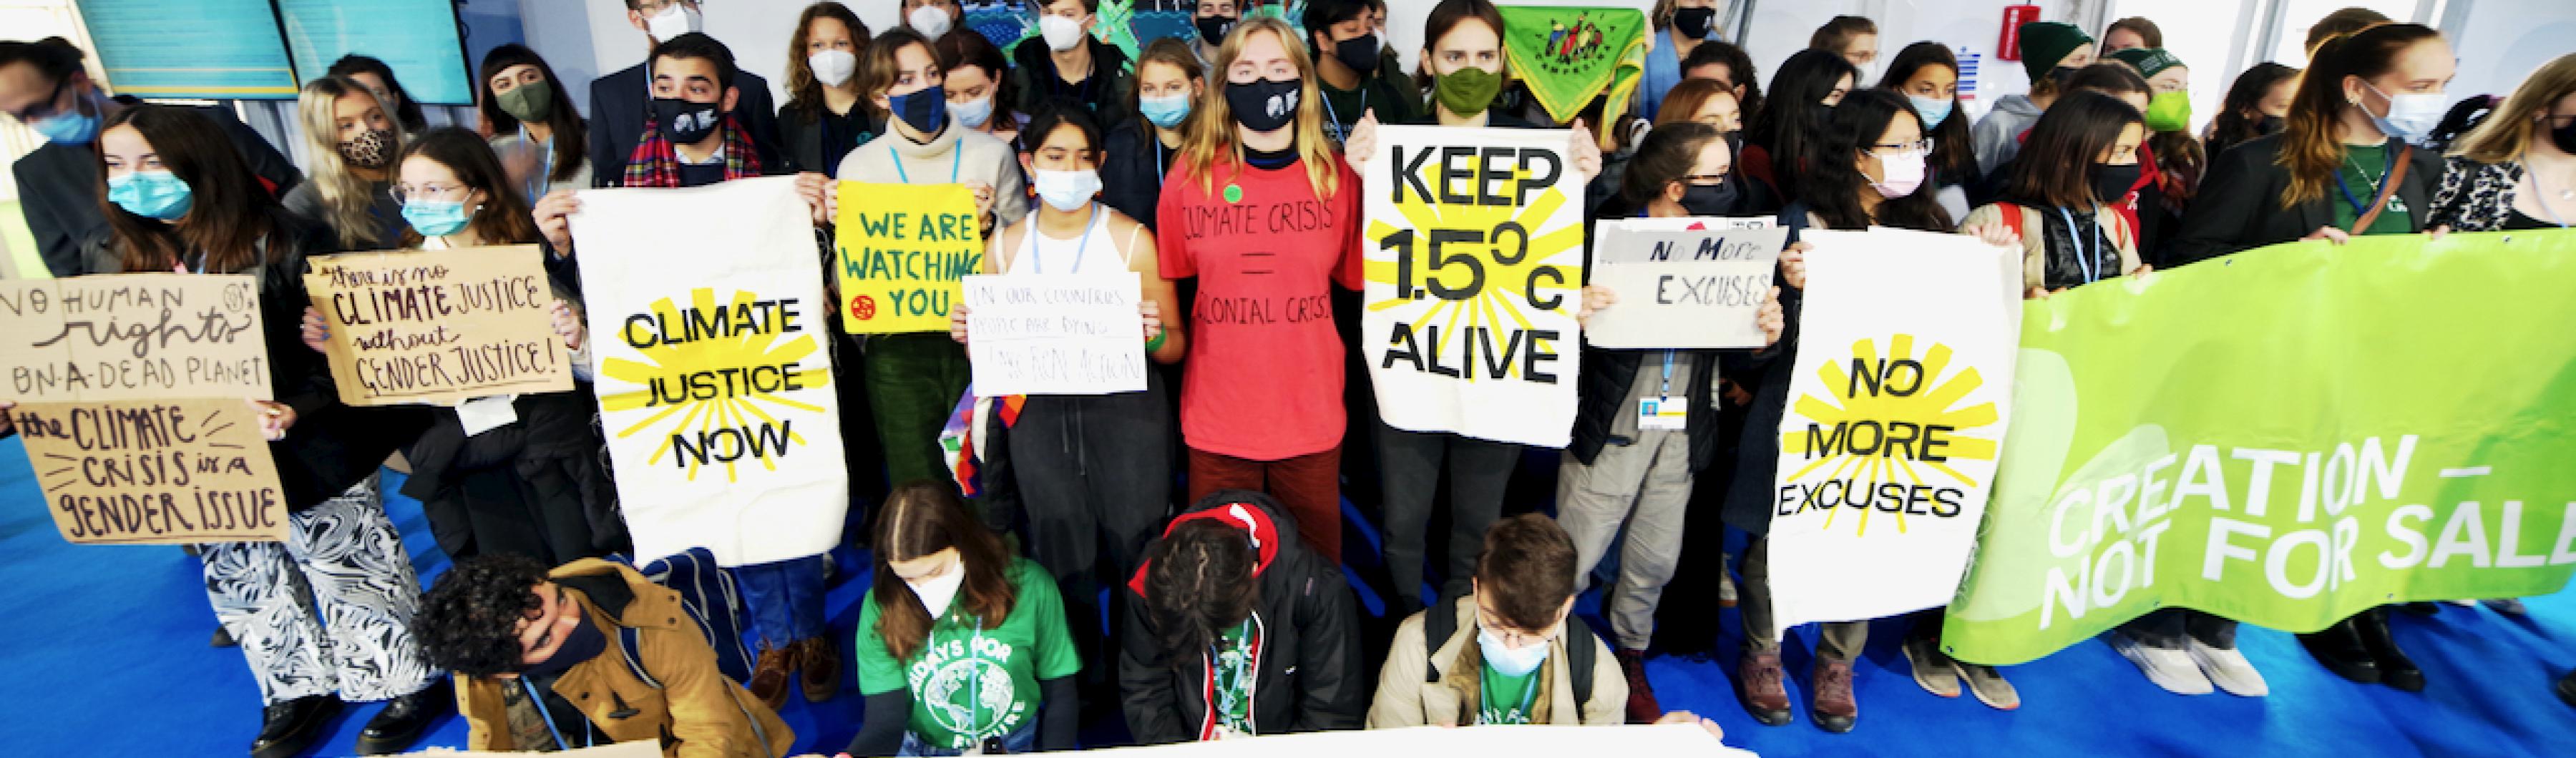 Youth strikers at COP26 in Glasgow. Richard Dixon / Friends of the Earth Scotland